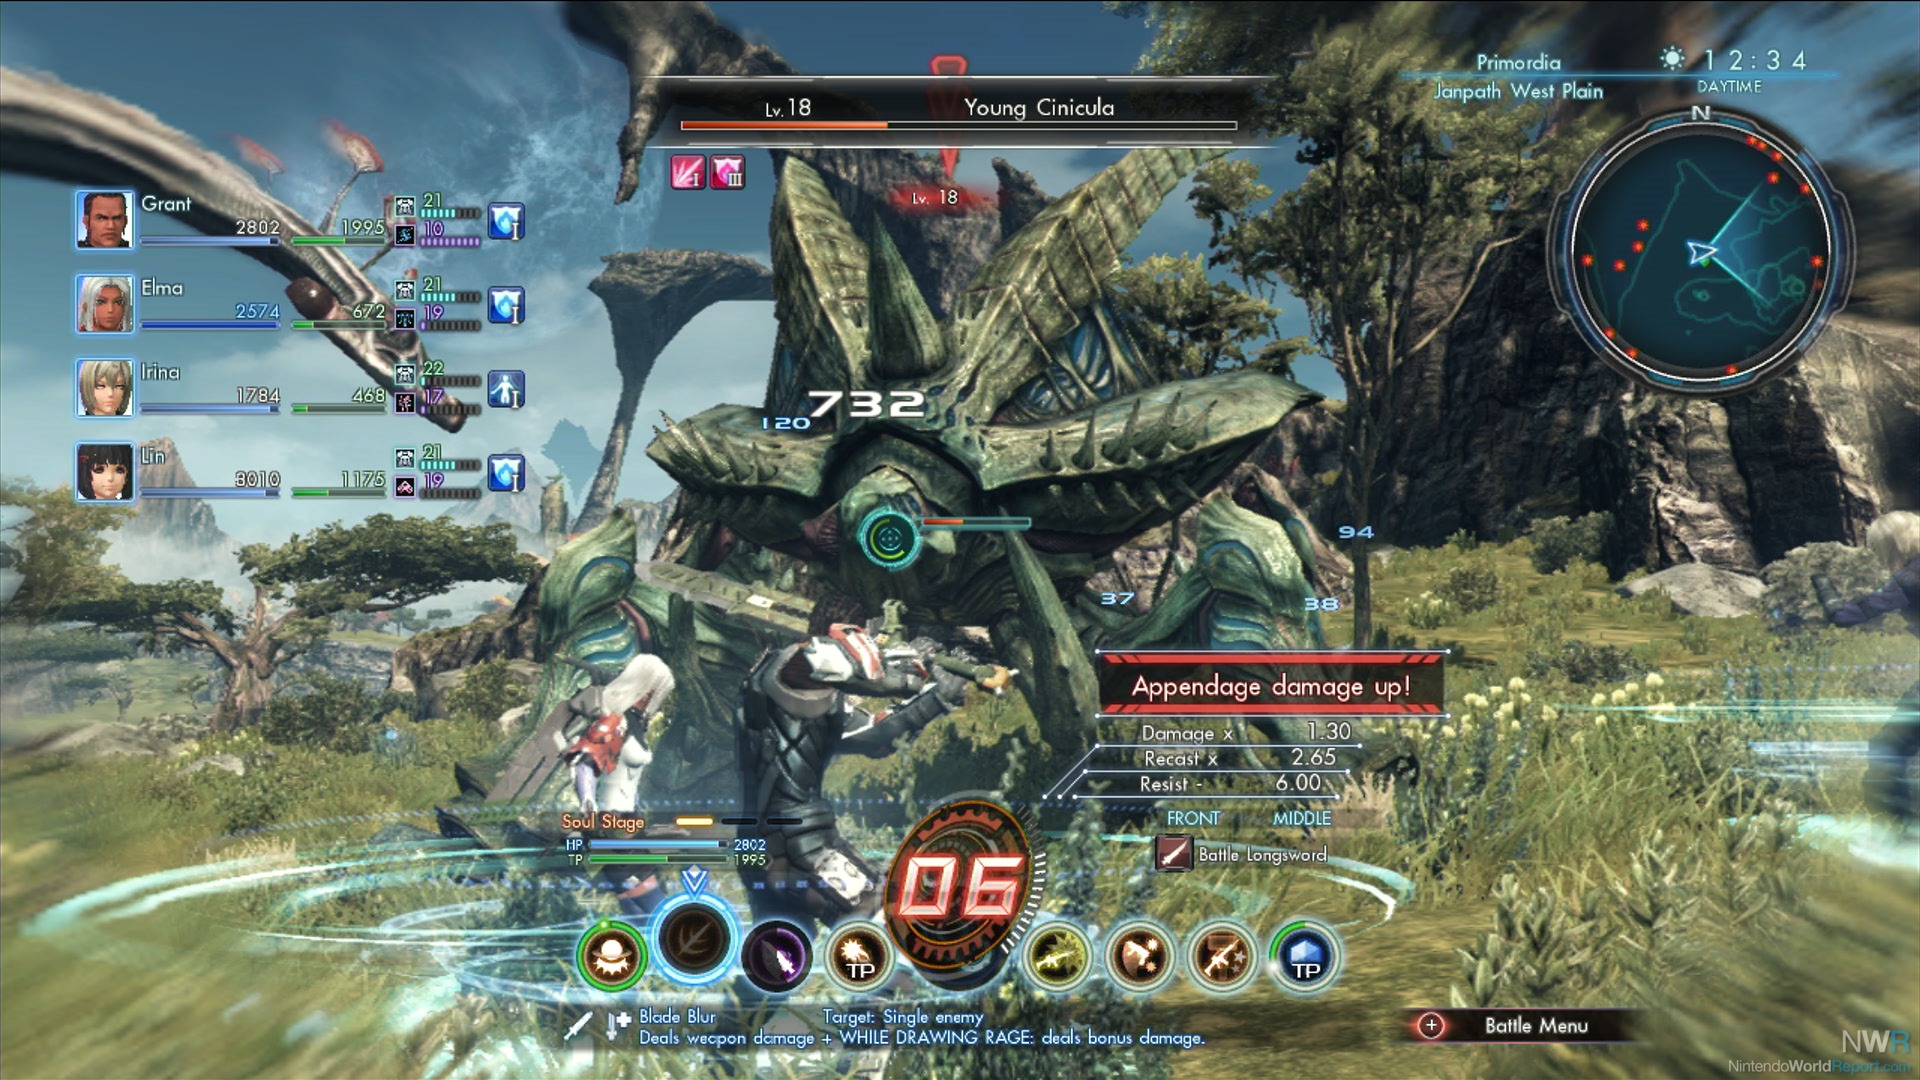 xenoblade chronicles x release date